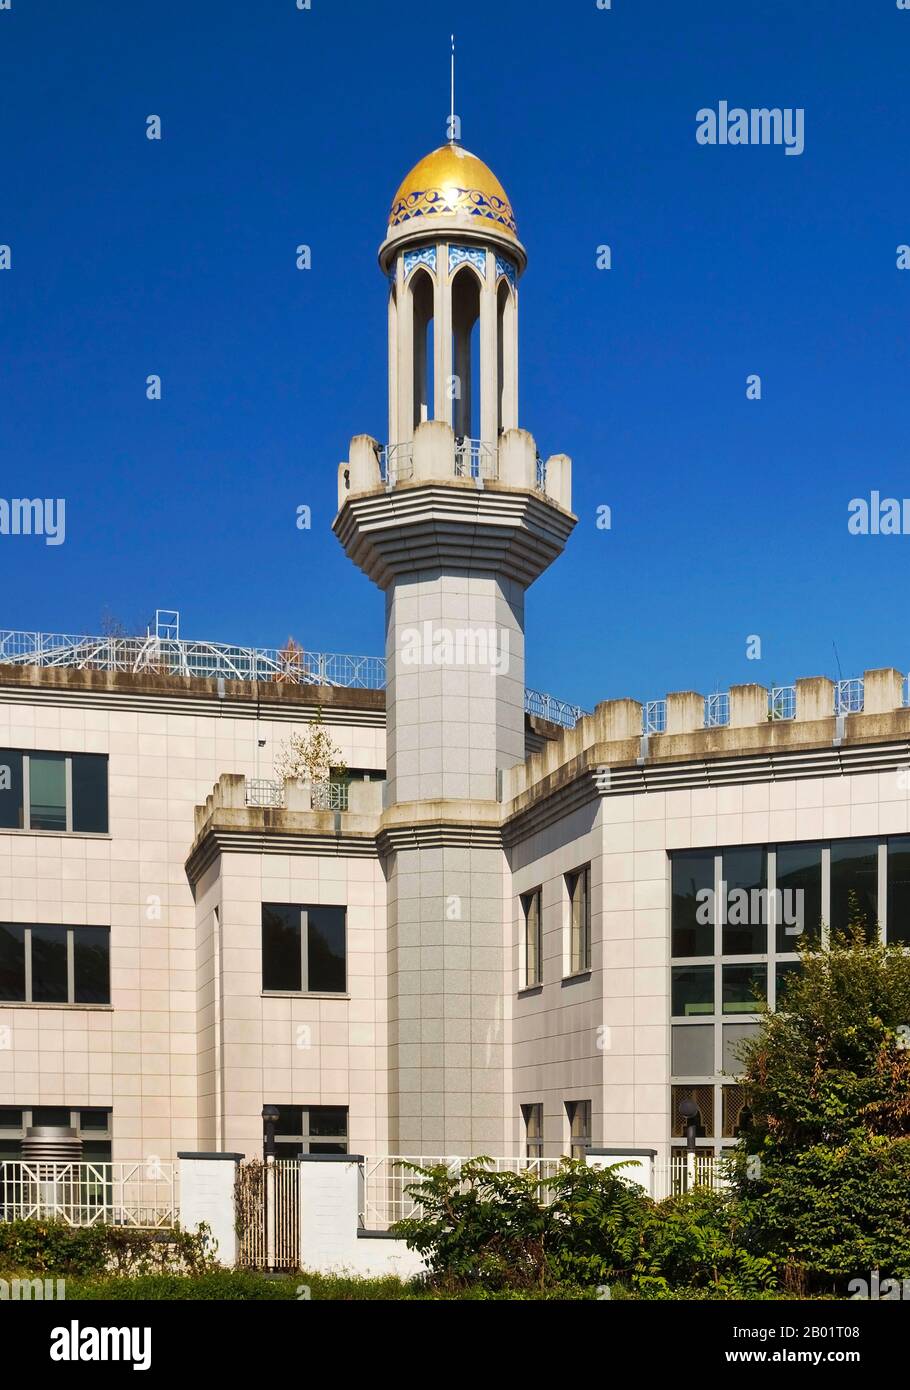 King Fahd Academy, former school with attached mosque, Germany, North Rhine-Westphalia, Bonn Stock Photo